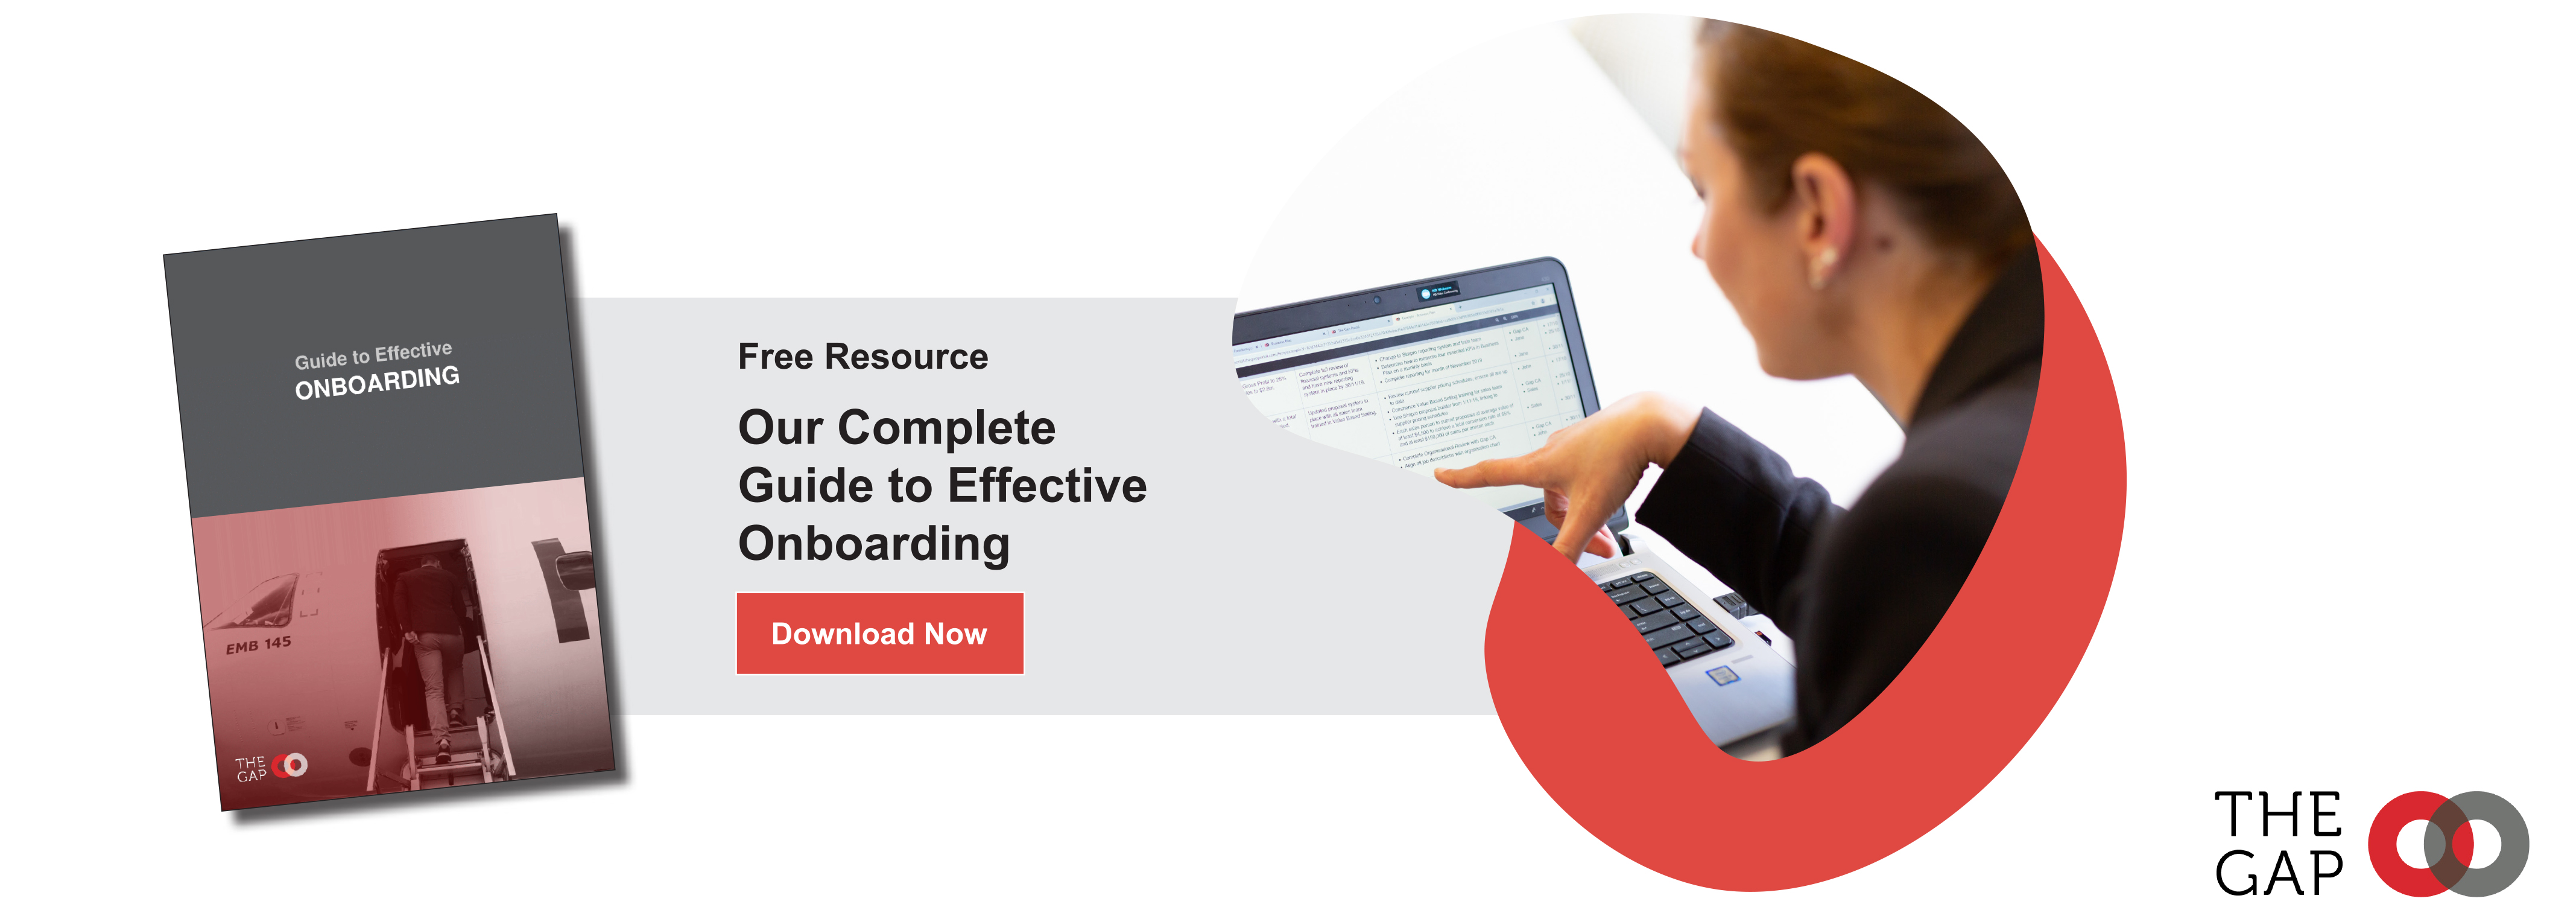 DOWNLOAD Our Complete Guide to Effective Onboarding